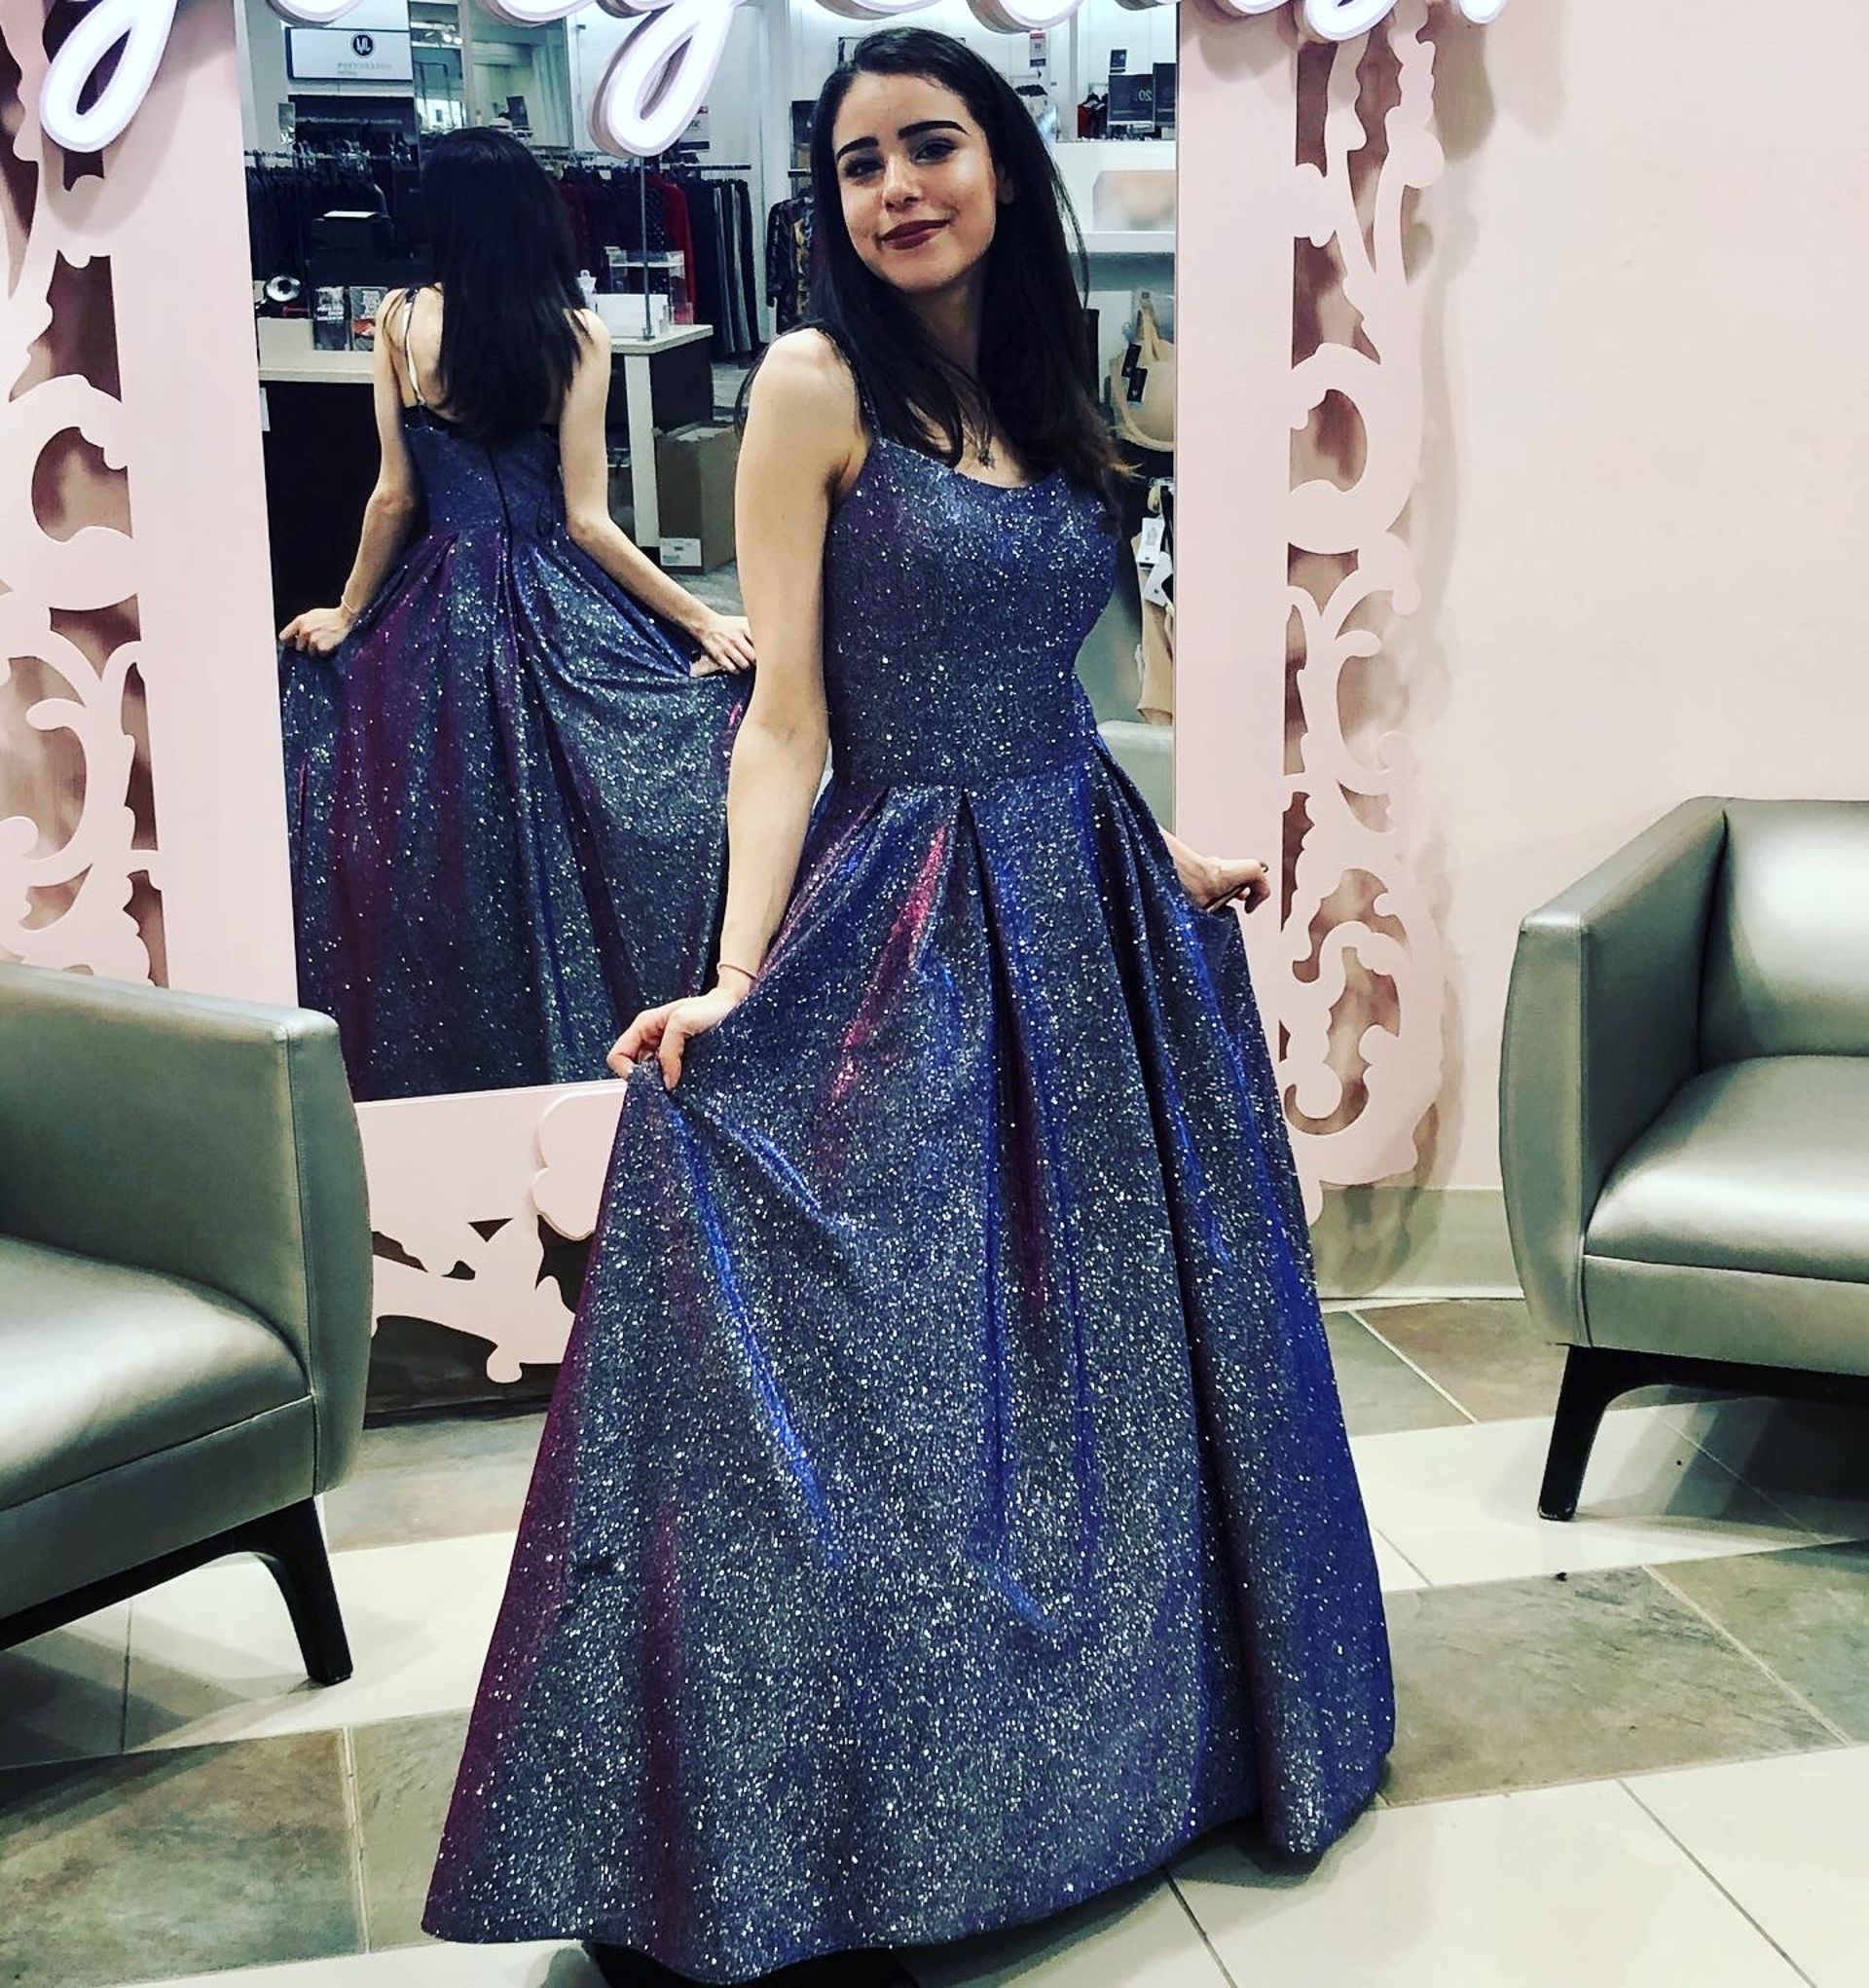 macy's formal ball gowns